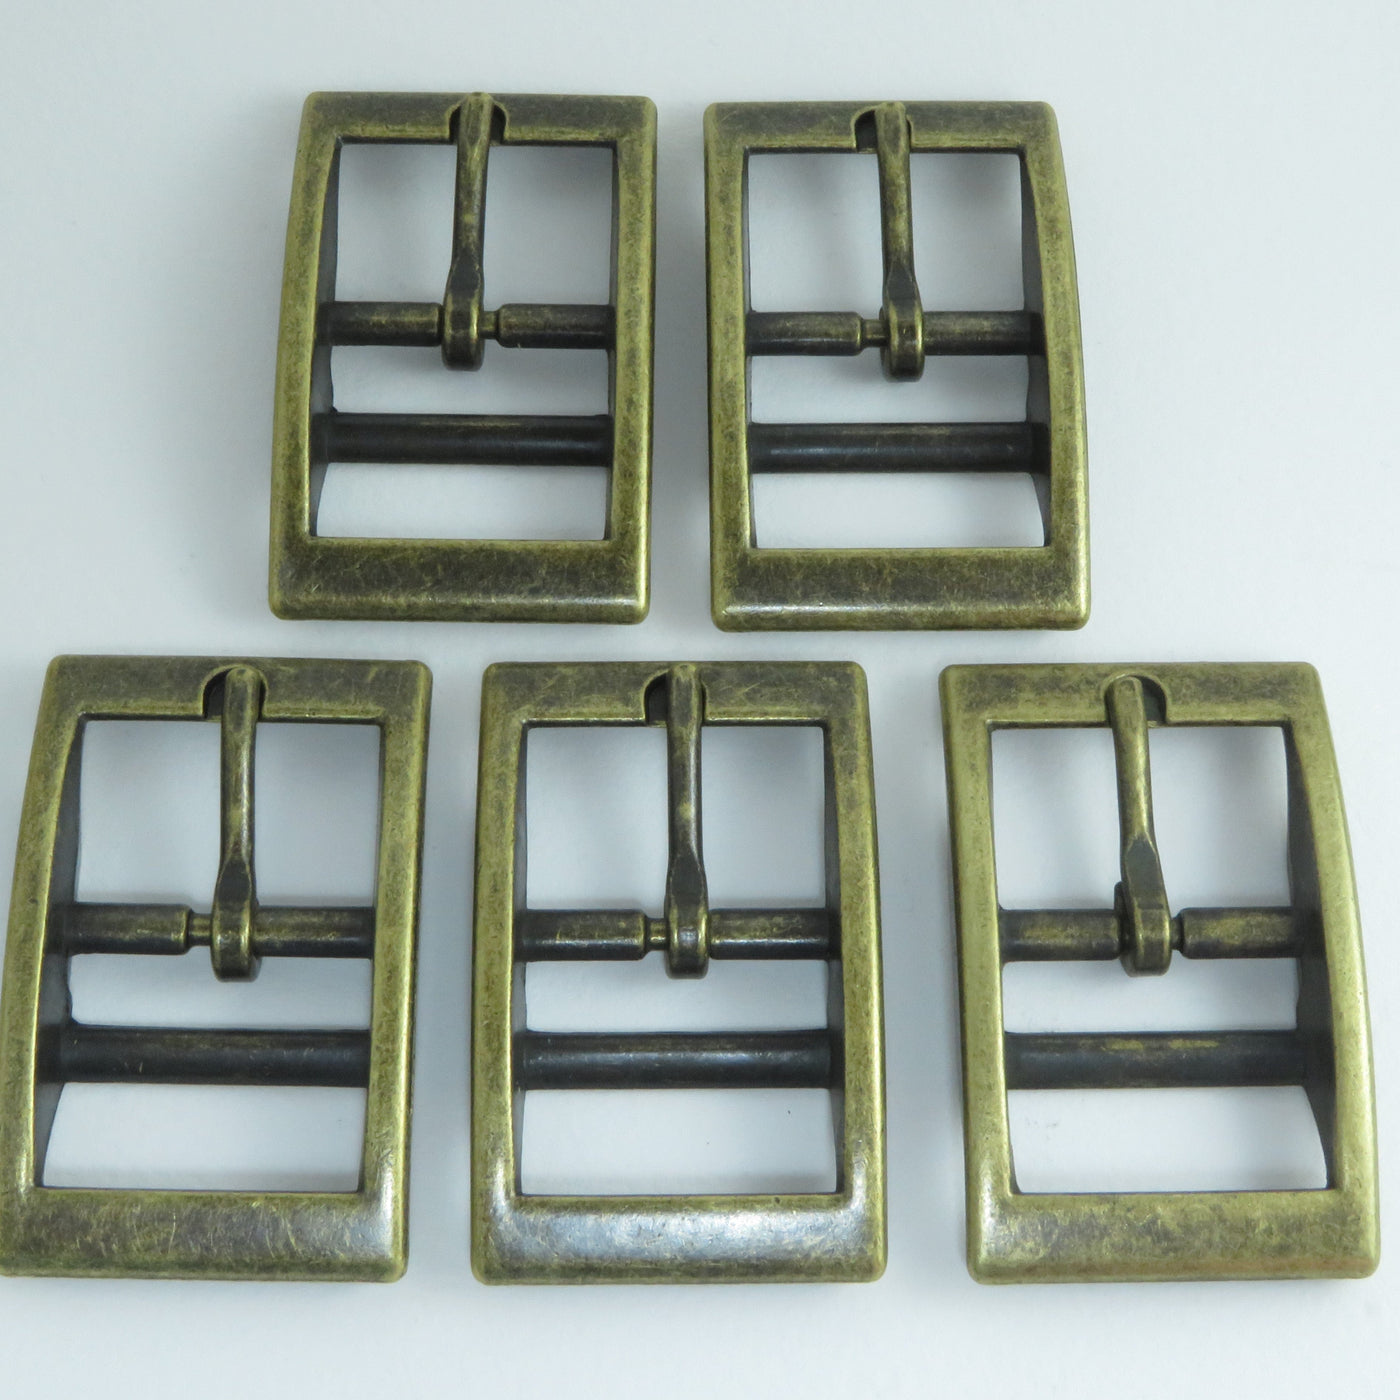 LeatherGoodieCompany Collar buckles.20, 25 mm Buckles for Bag straps,belts,dog collars.Black,antique Brass,Nickel Webbing Equestrian Buckles.